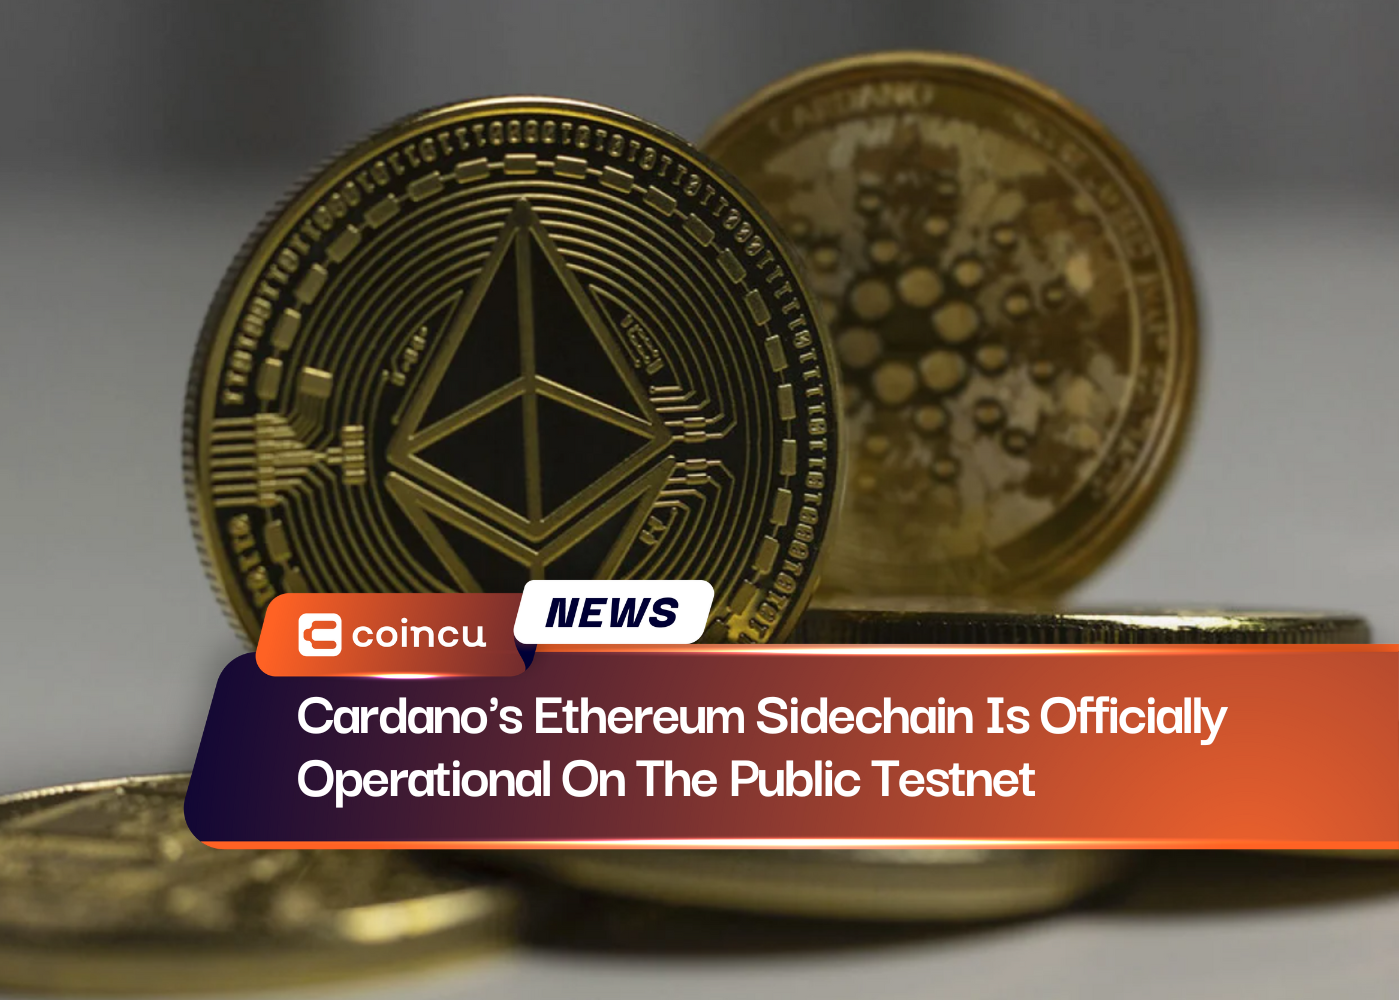 Cardano's Ethereum Sidechain Is Officially Operational On The Public Testnet - CoinCu News